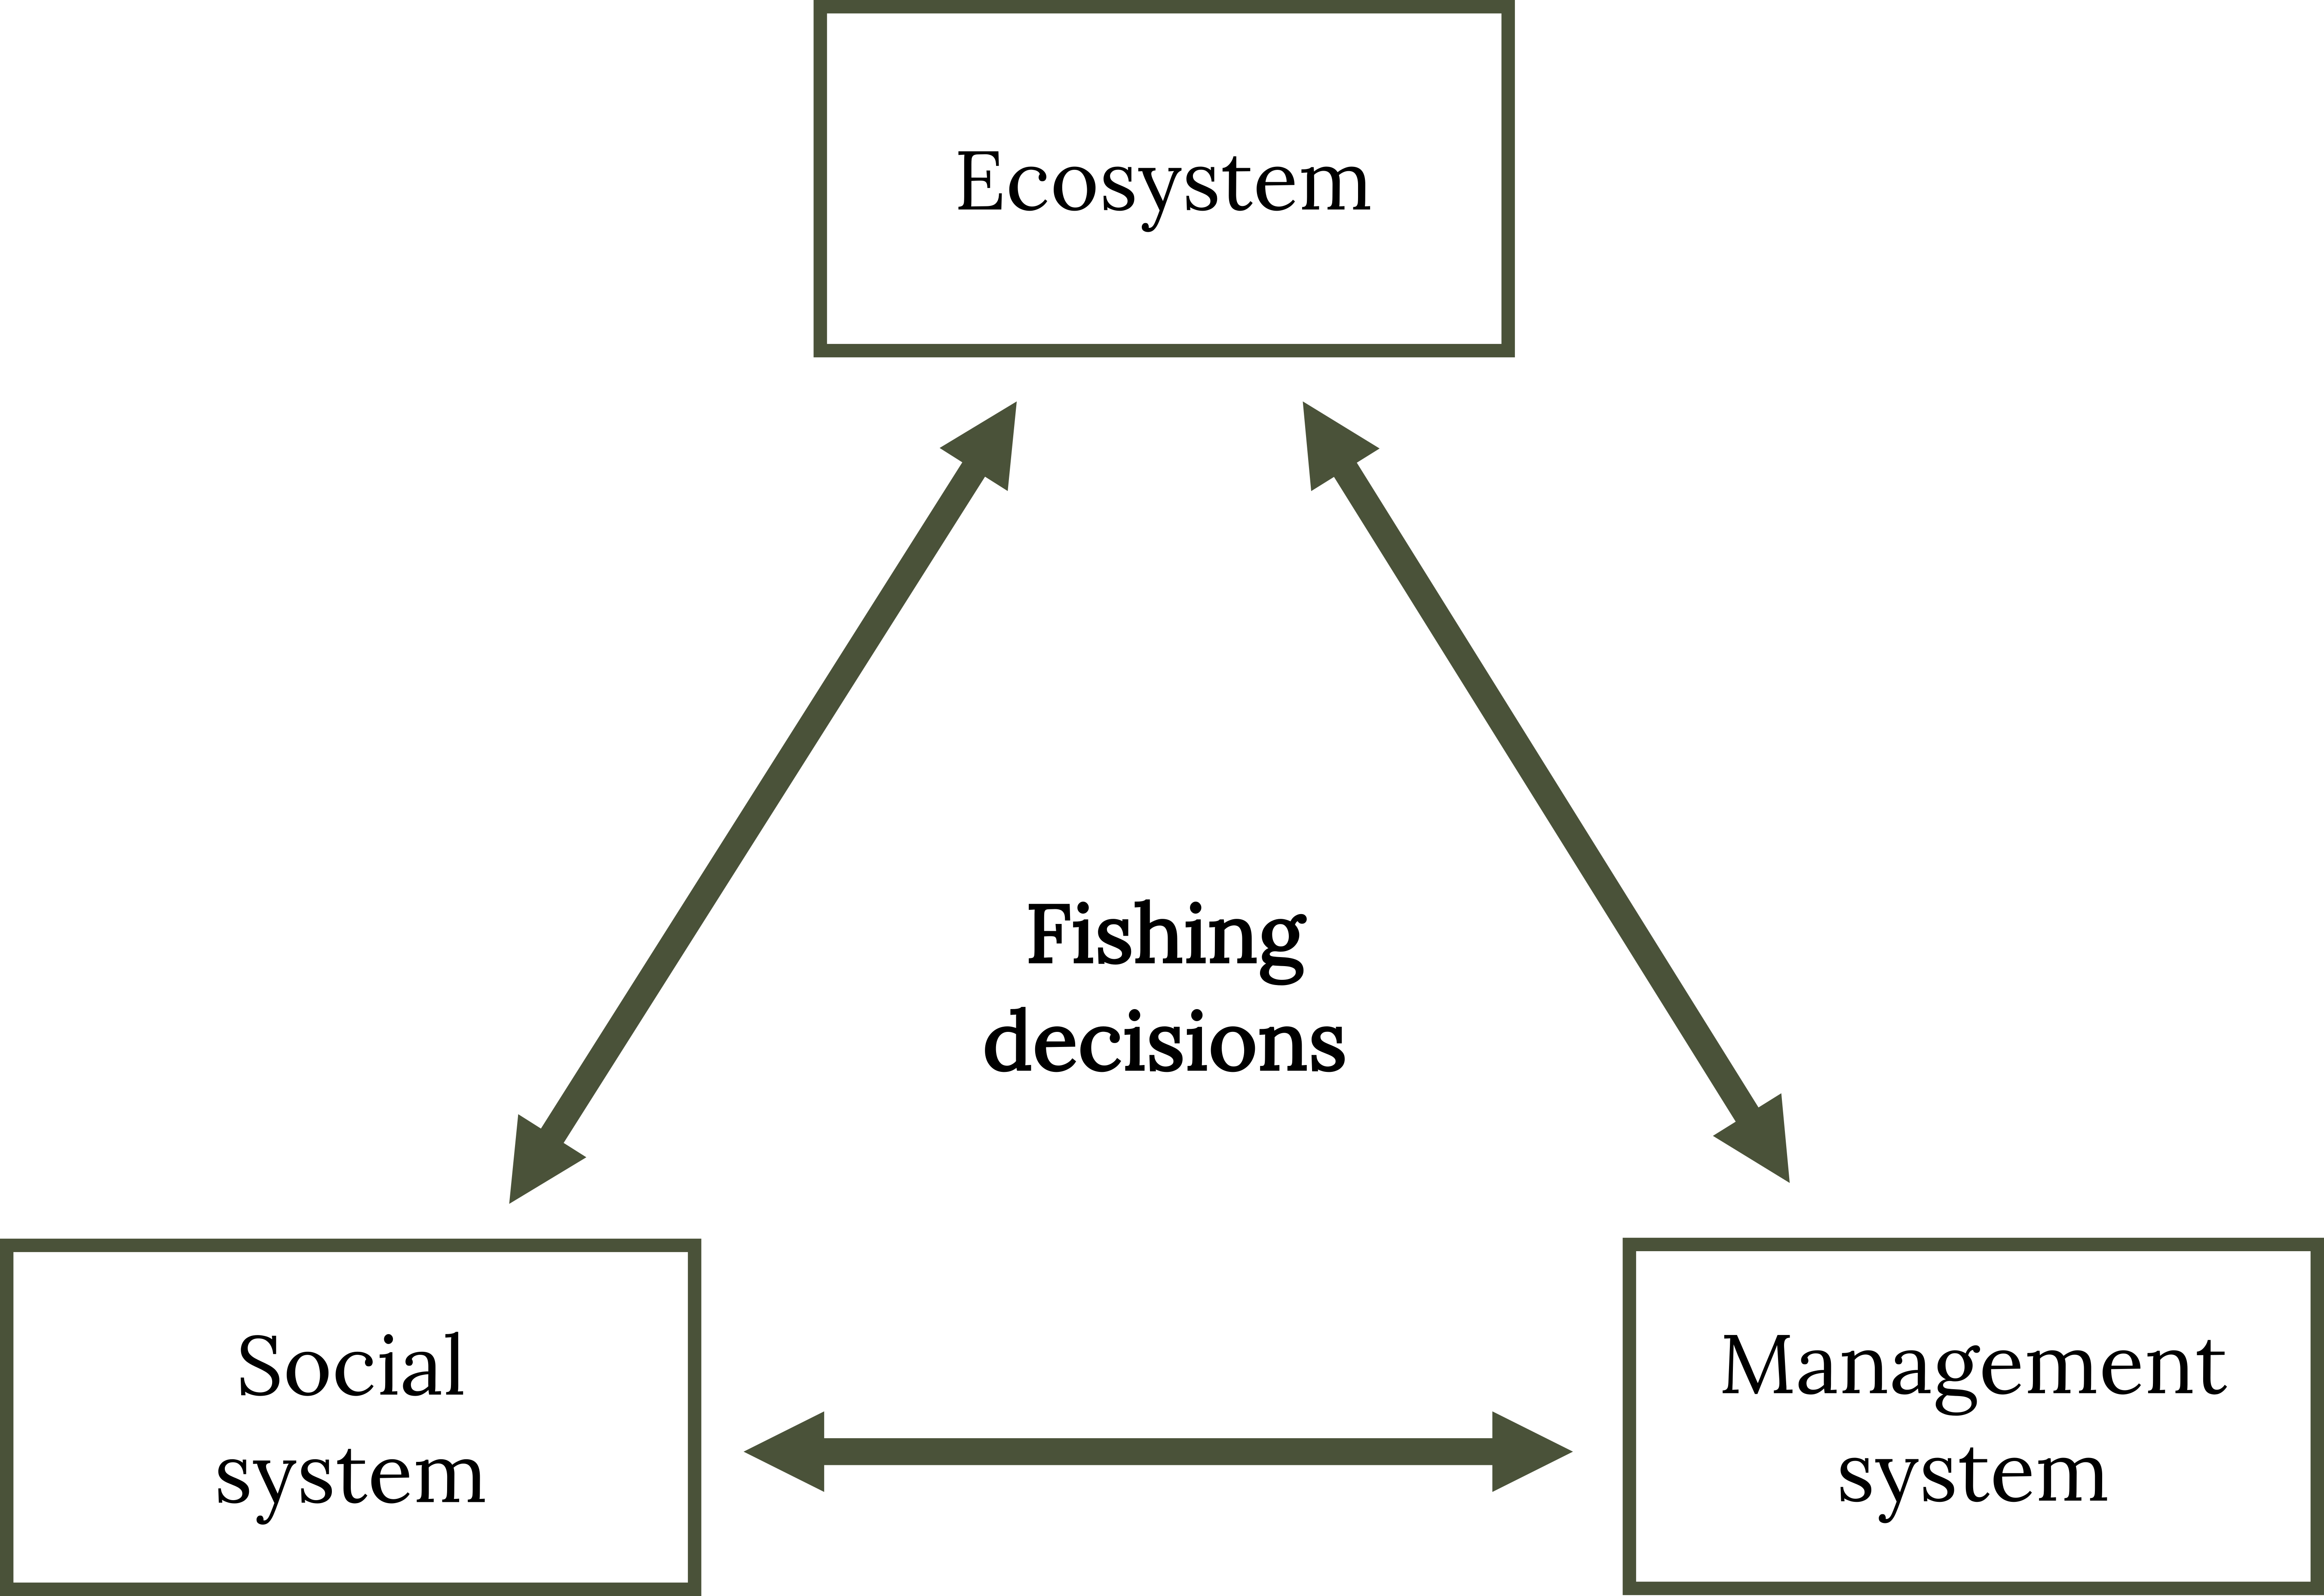 Flow chart depicts fishing decisions are centered around connections between social, ecological, and management systems